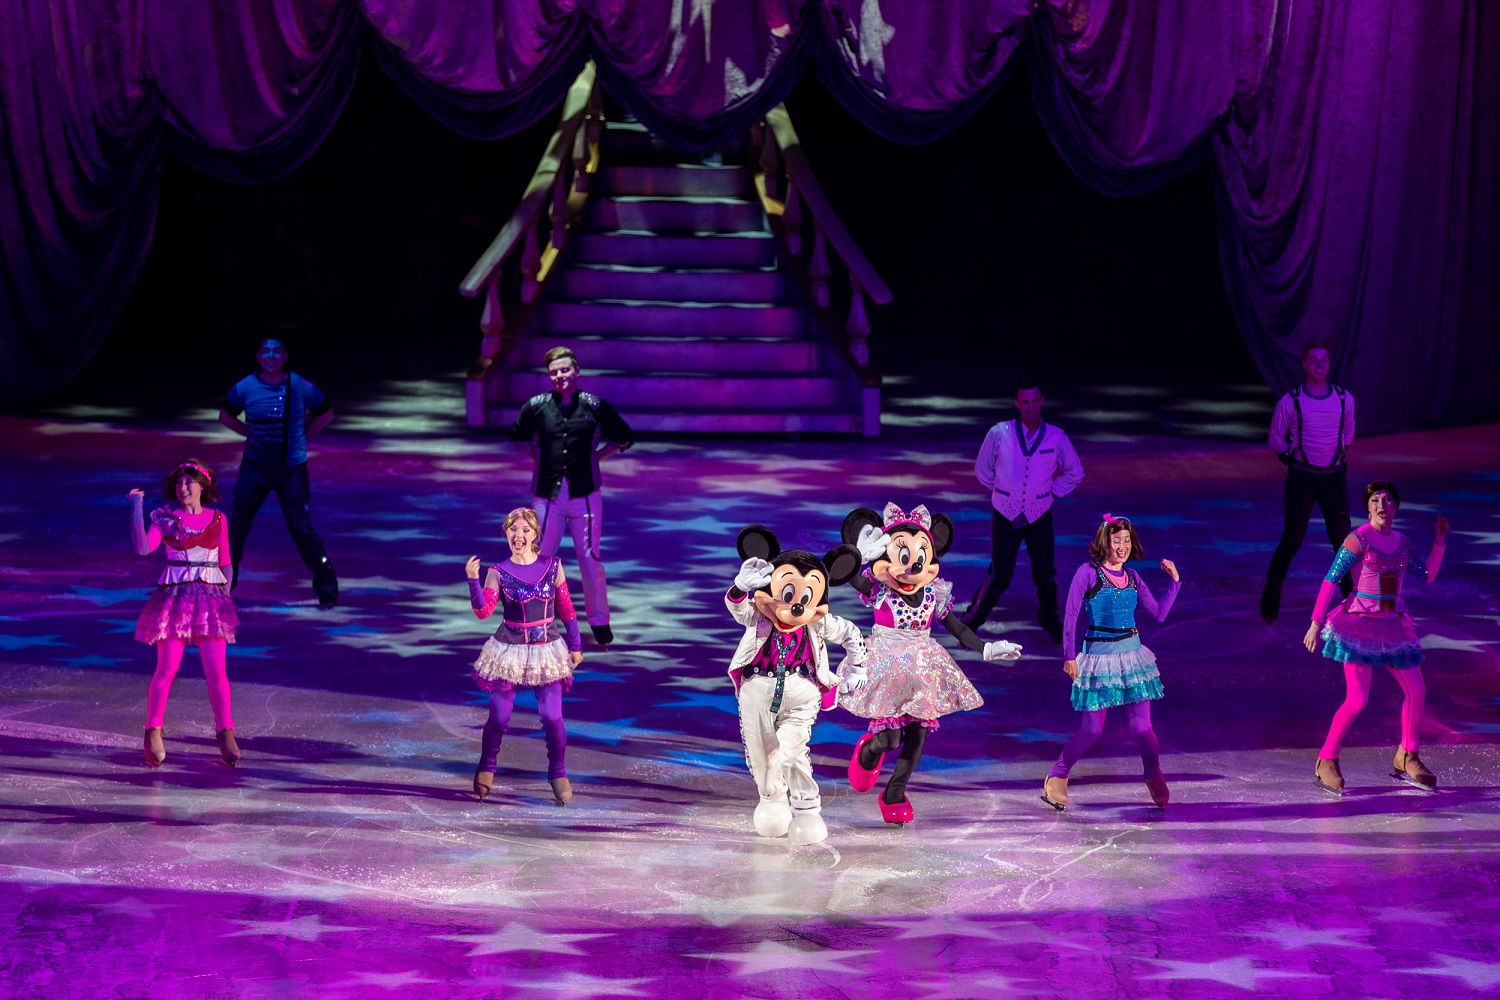 Disney On Ice Spectacular And Russell Peters Comedy Show Bring 30,000 Fans To Abu Dhabi’s Etihad Arena